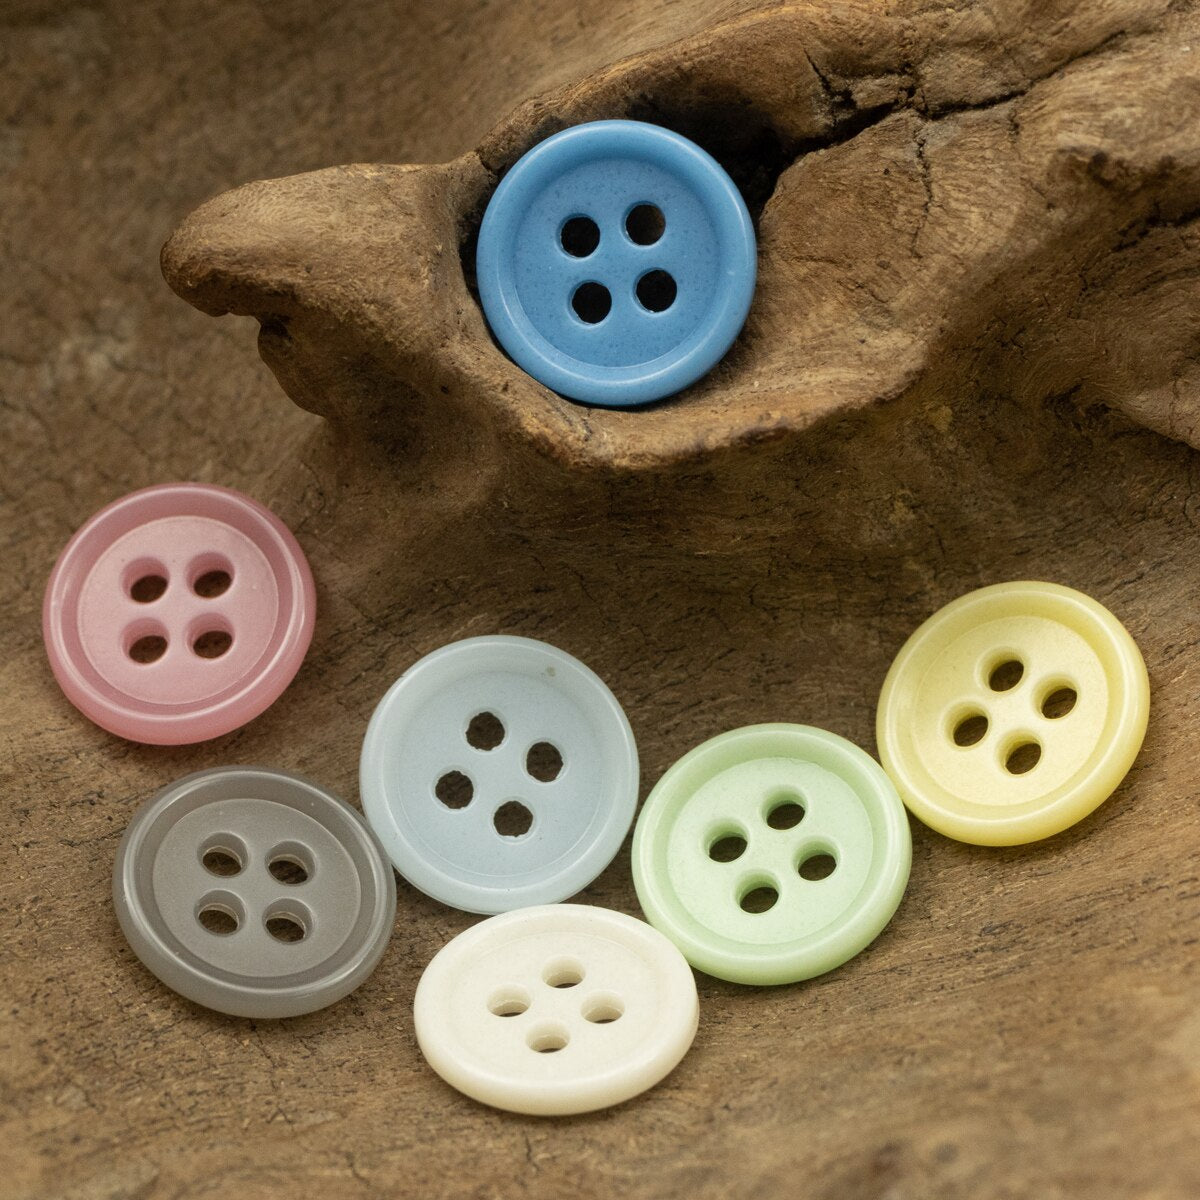 12pcs DIY Children Clothing Buttons Urea Odorless Sewing Accessories S